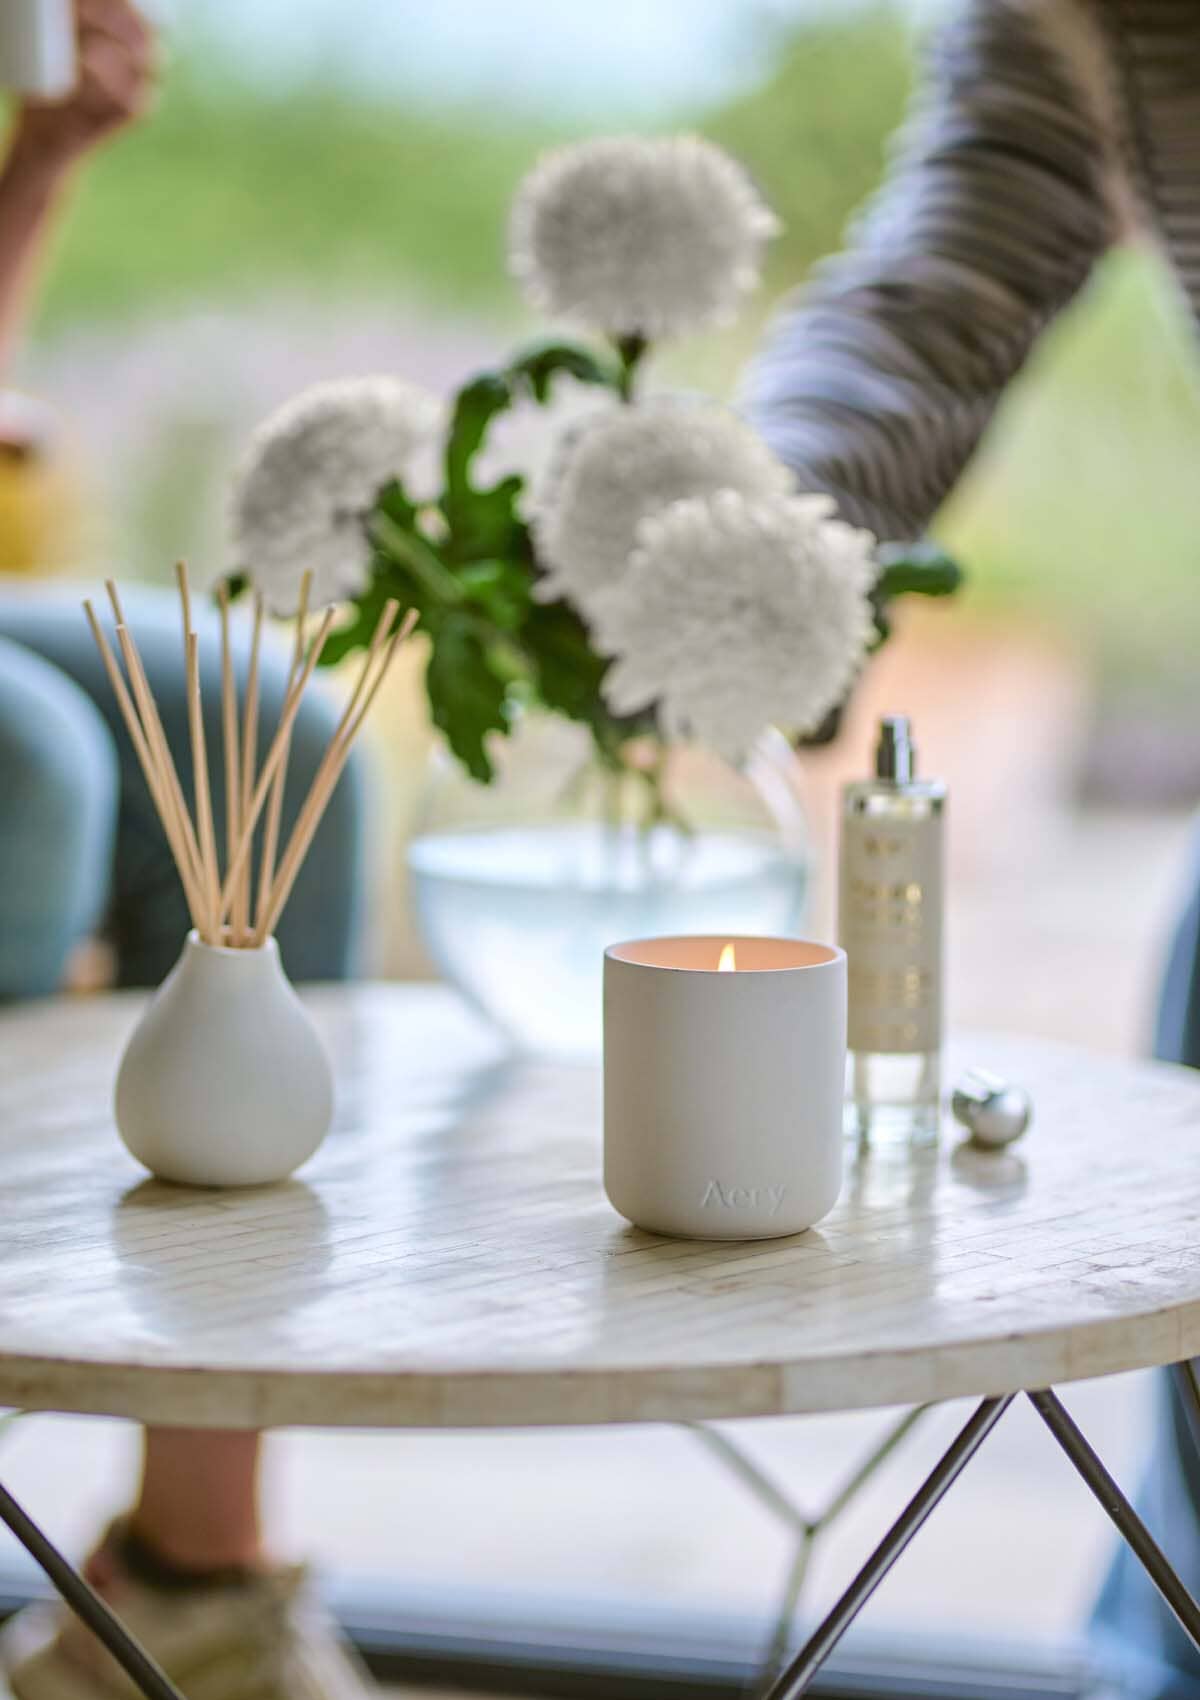 Nordic Cedar diffuser by aery displayed next to nordic cedar candle and room mist placed in front of vase of white flowers 